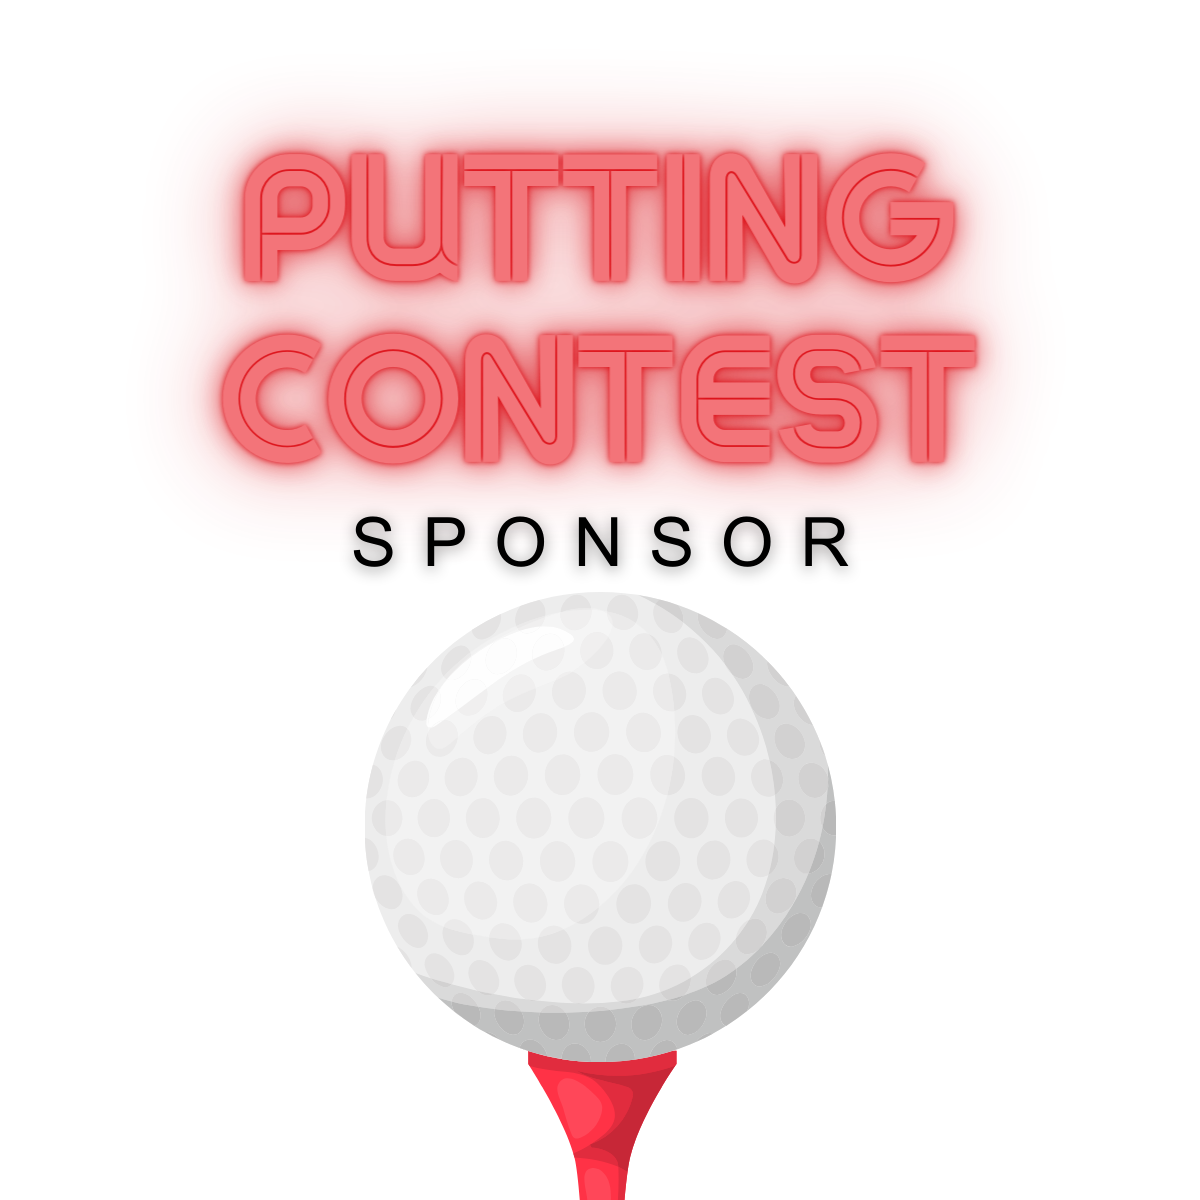 Putting Contest Sponsor - Mid-Con Open